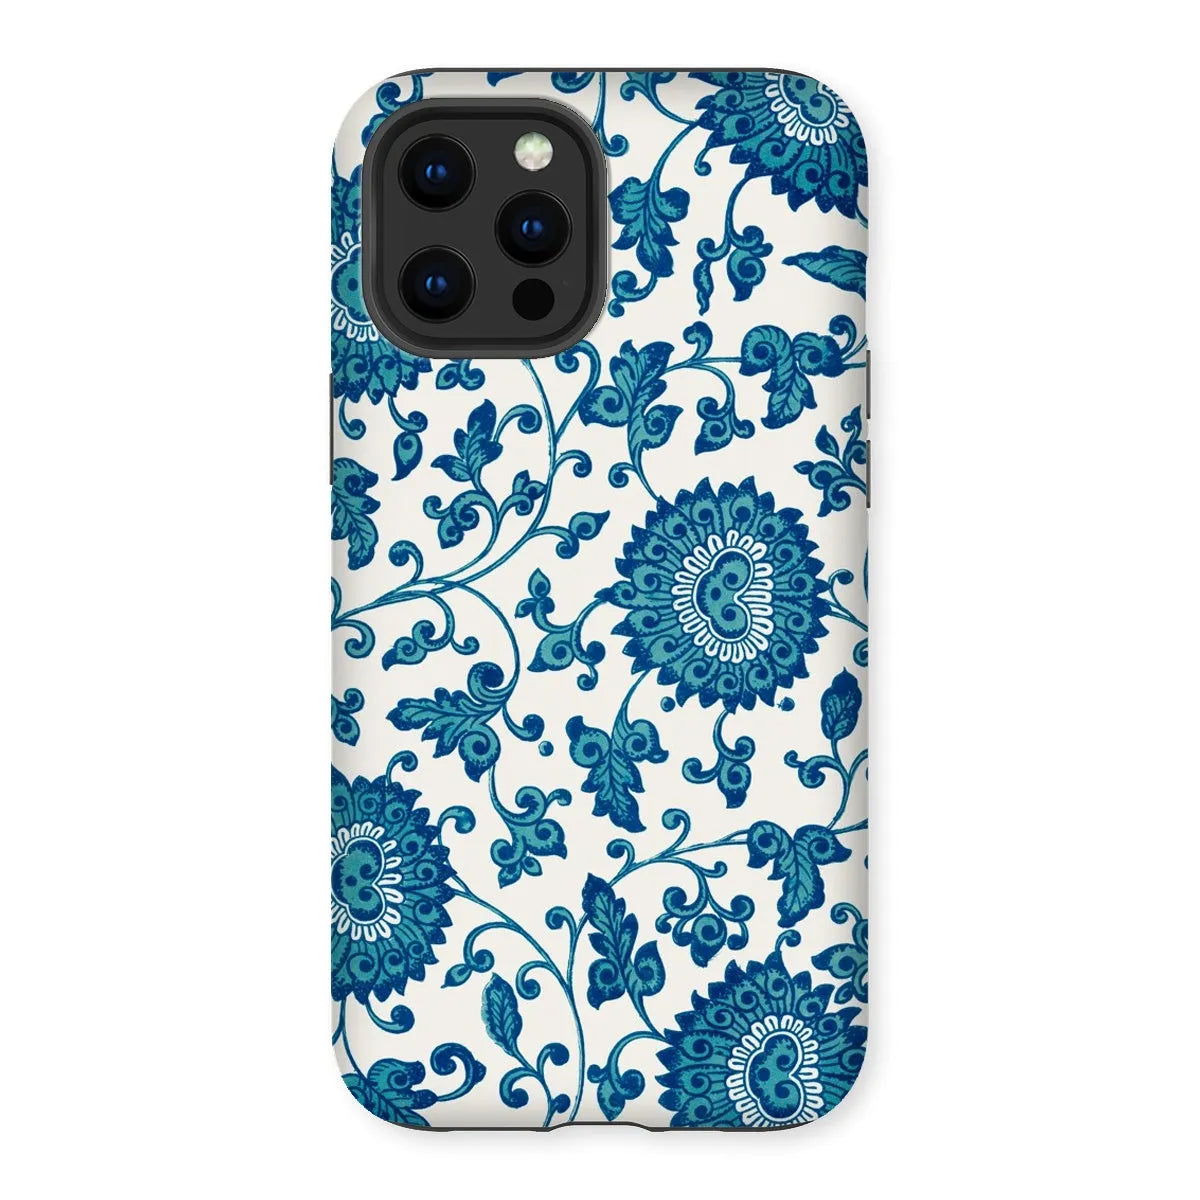 Blue And White Floral Aesthetic Art Phone Case - Owen Jones - Iphone 12 Pro Max / Matte - Mobile Phone Cases